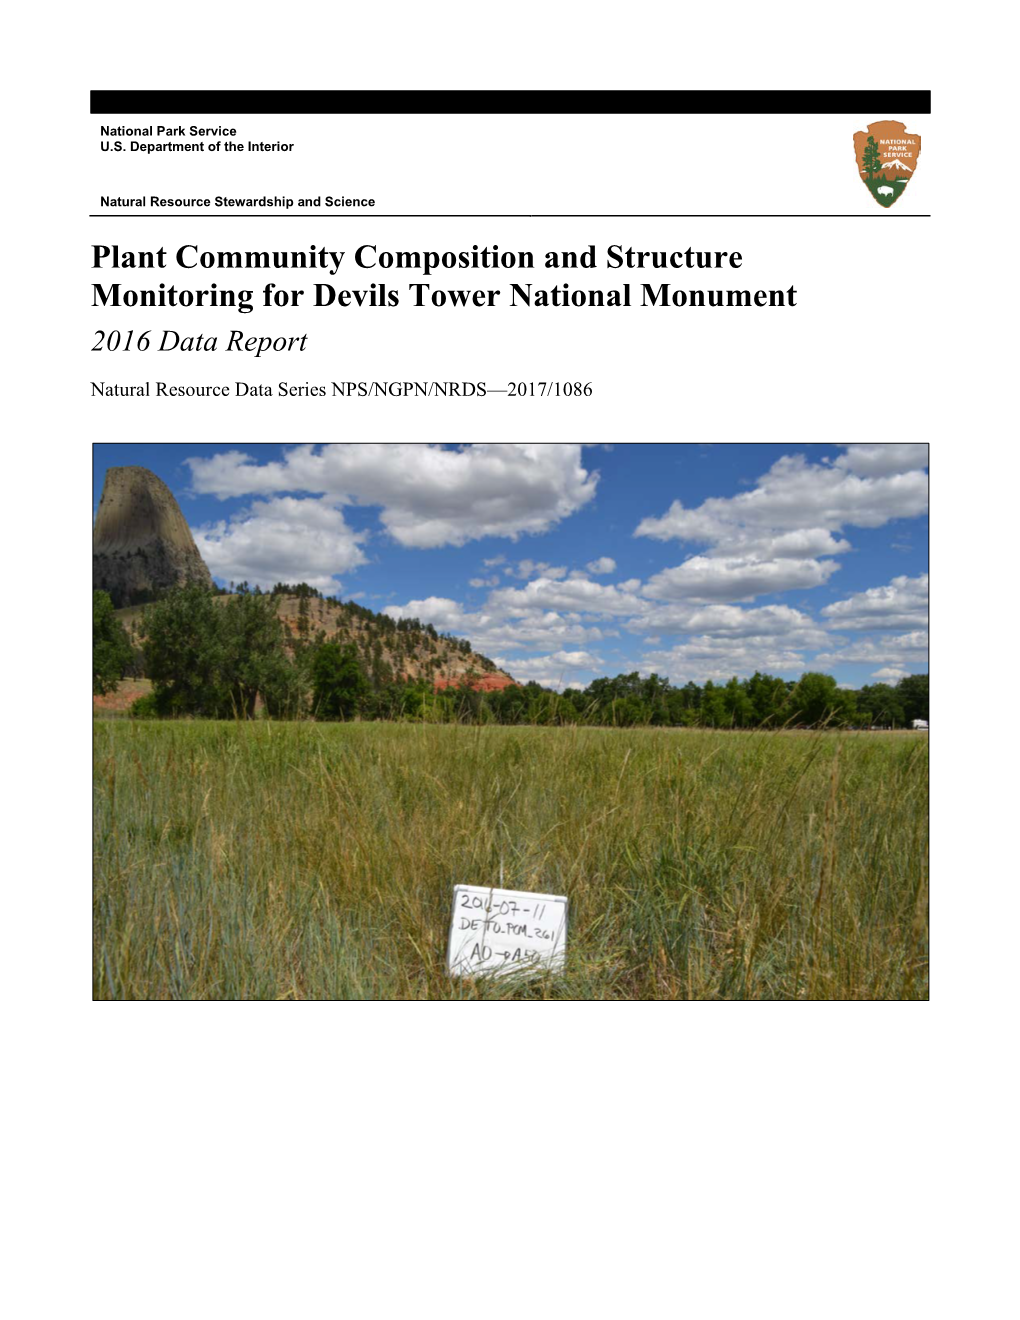 Plant Community Composition and Structure Monitoring for Devils Tower National Monument 2016 Data Report